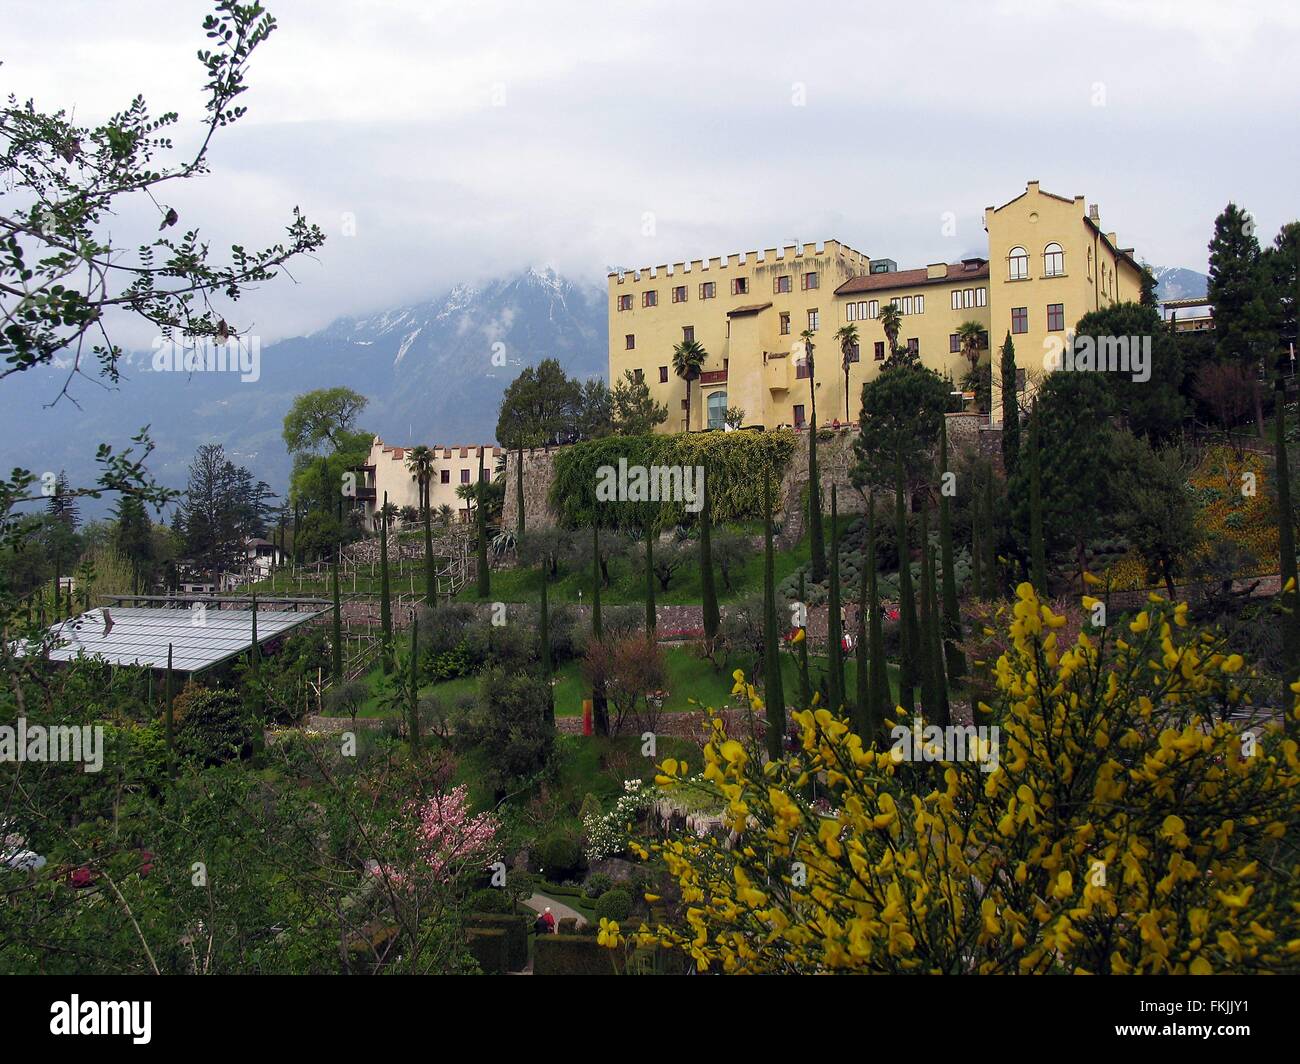 The Trauttmansdorff Castle is located on the eastern outskirts of Meran. There, the South Tyrol Museum of Tourism is housed. The botanical garden of Trauttmansdorff has a large area. Merano, Trauttmansdorff, South Tyrol, Italy, Europe Date: April 13, 2012 Stock Photo